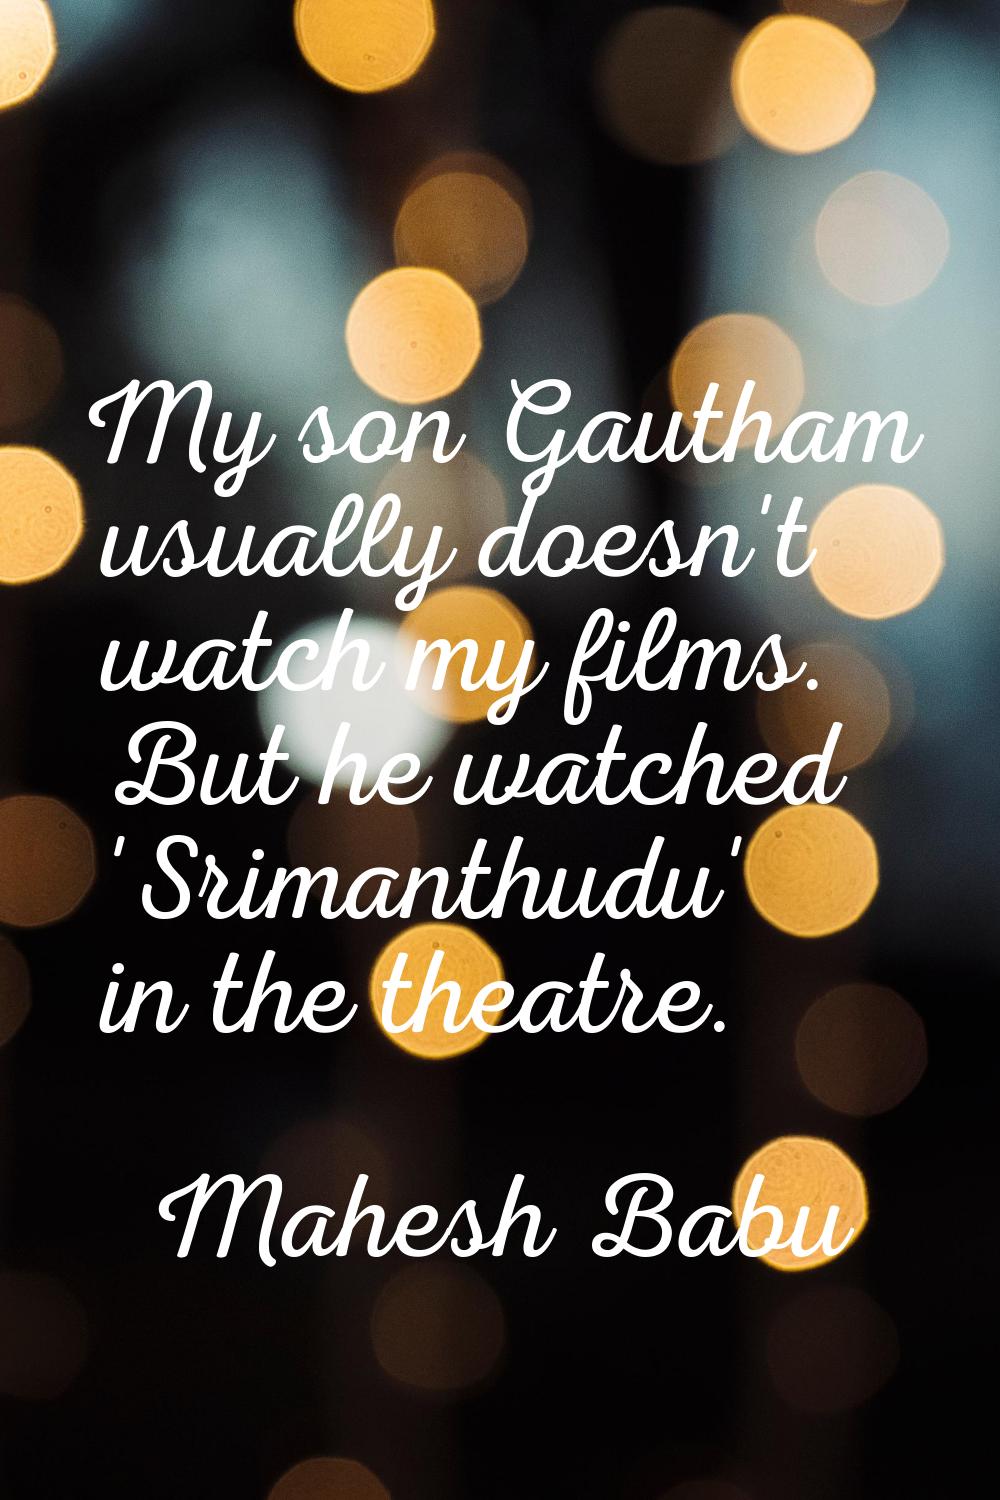 My son Gautham usually doesn't watch my films. But he watched 'Srimanthudu' in the theatre.